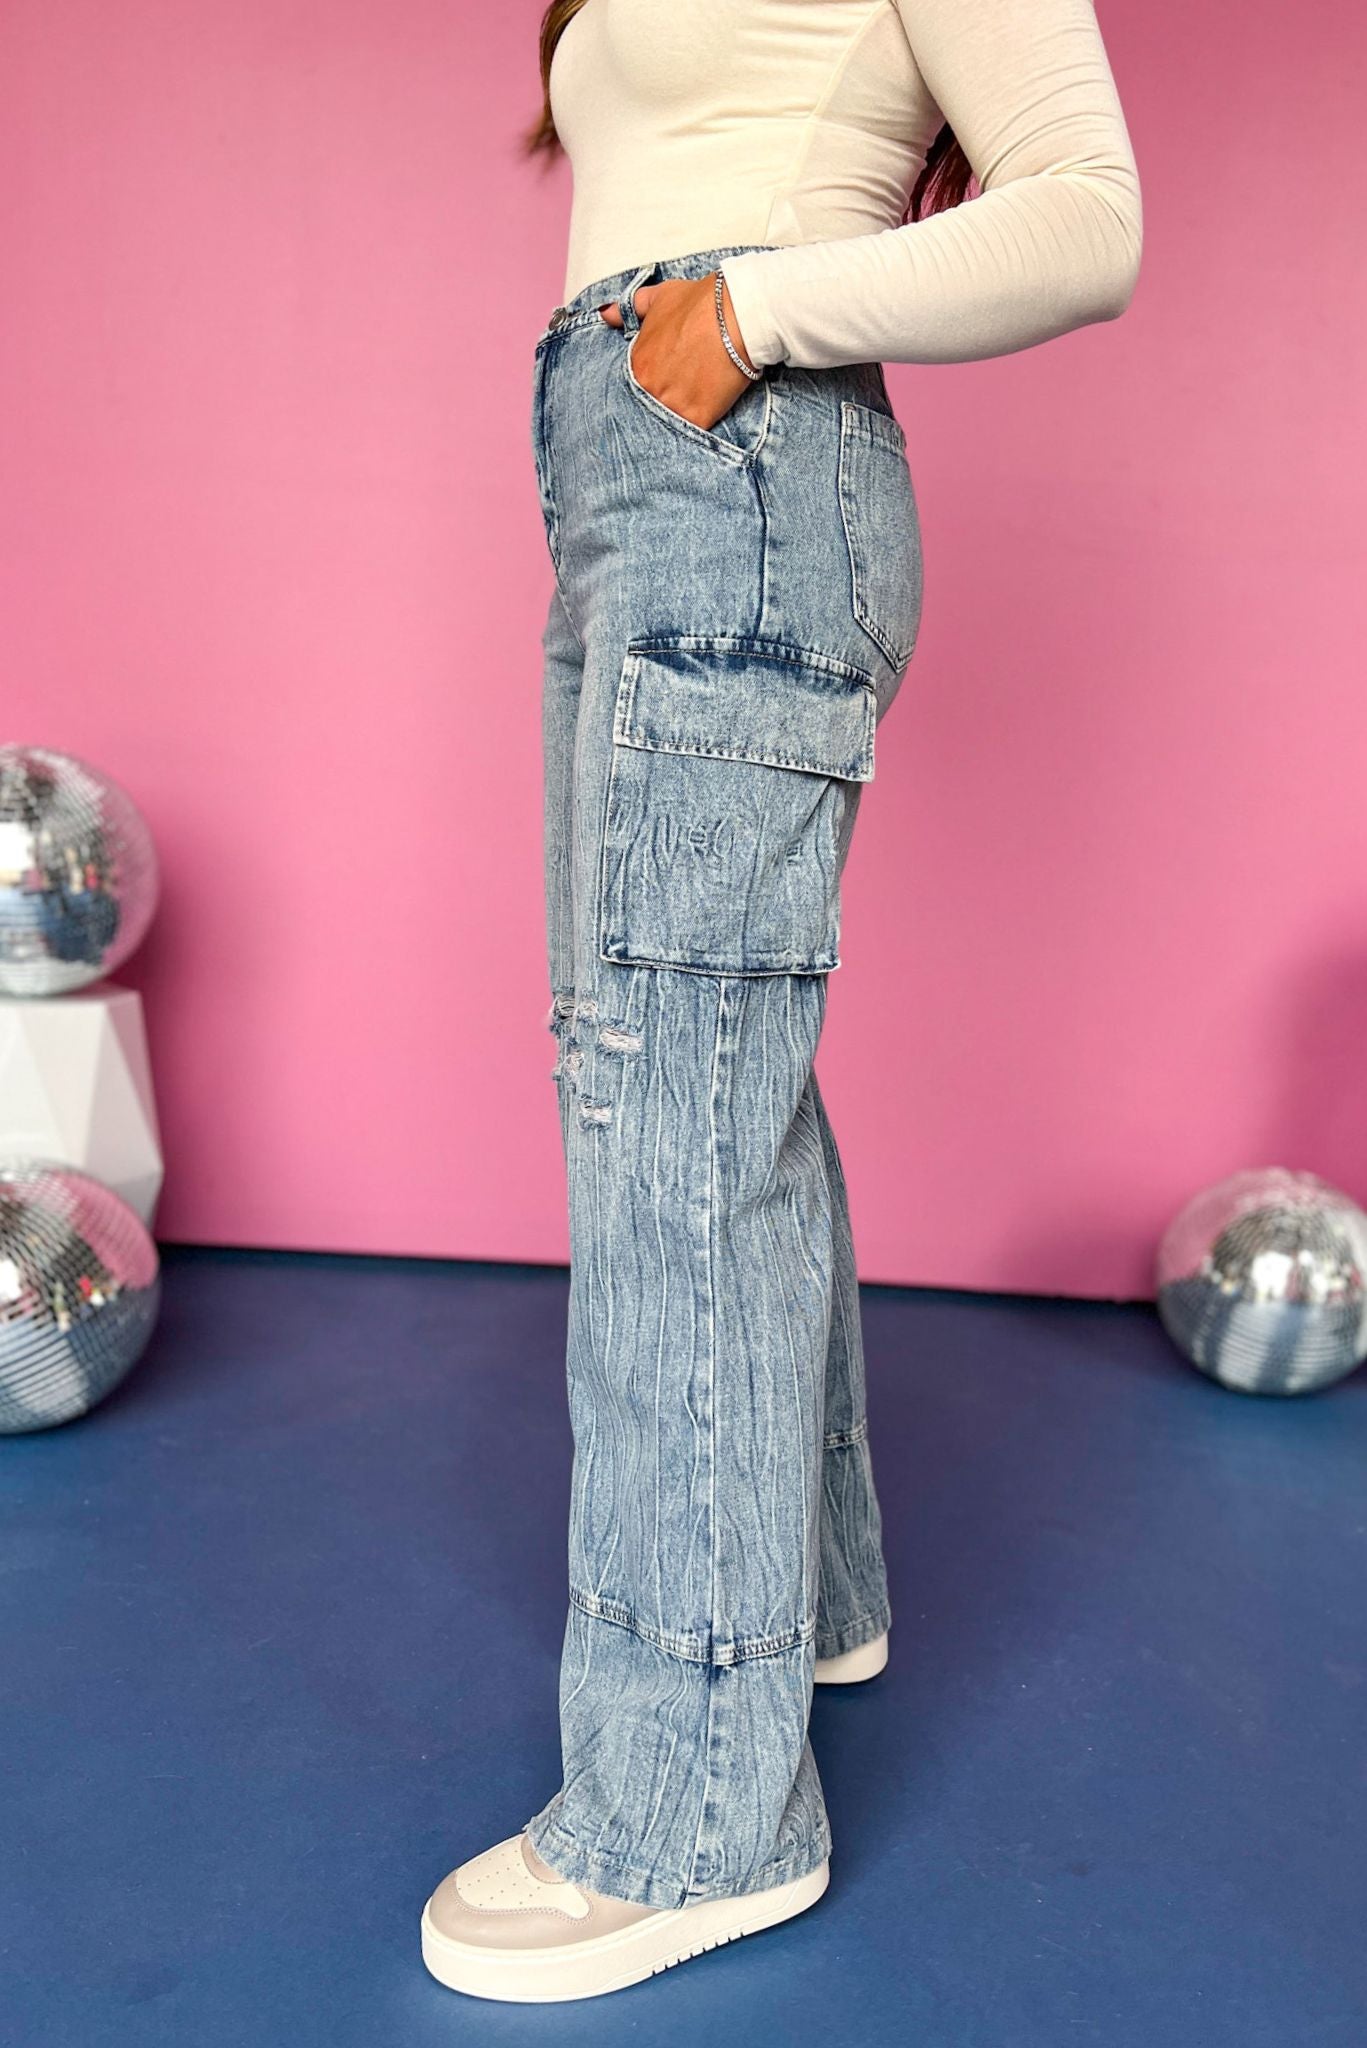 High Waisted Cargo Pants - Pink Wash